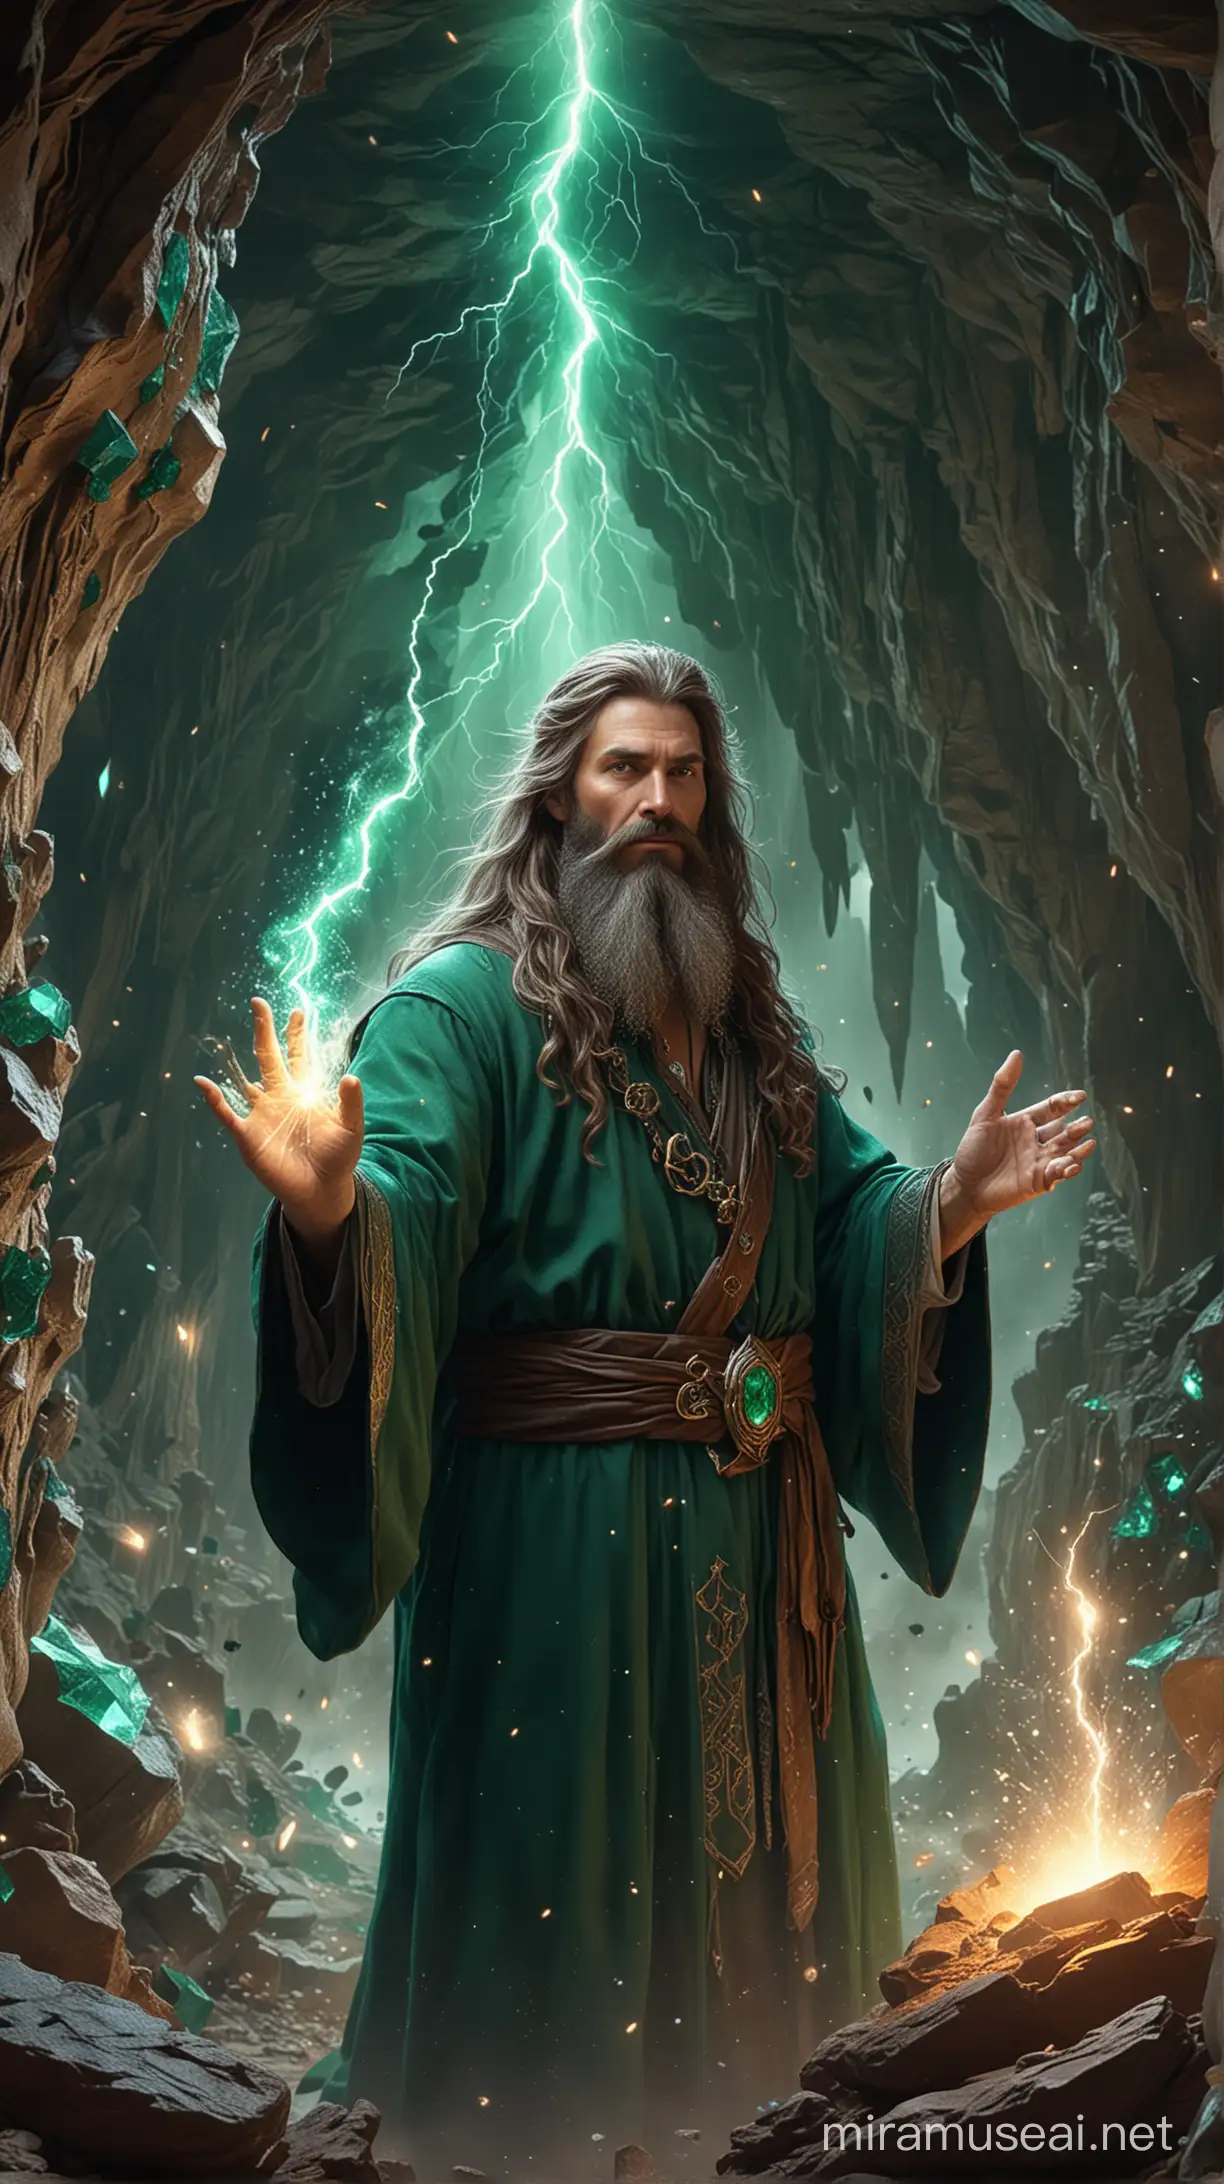 16k, high detail, beautiful, Wizard 40 years old with a beard and long brown hair conjuring, lightning bolts bursting out of his hands, the background is a very beautiful cave with large emerald crystals